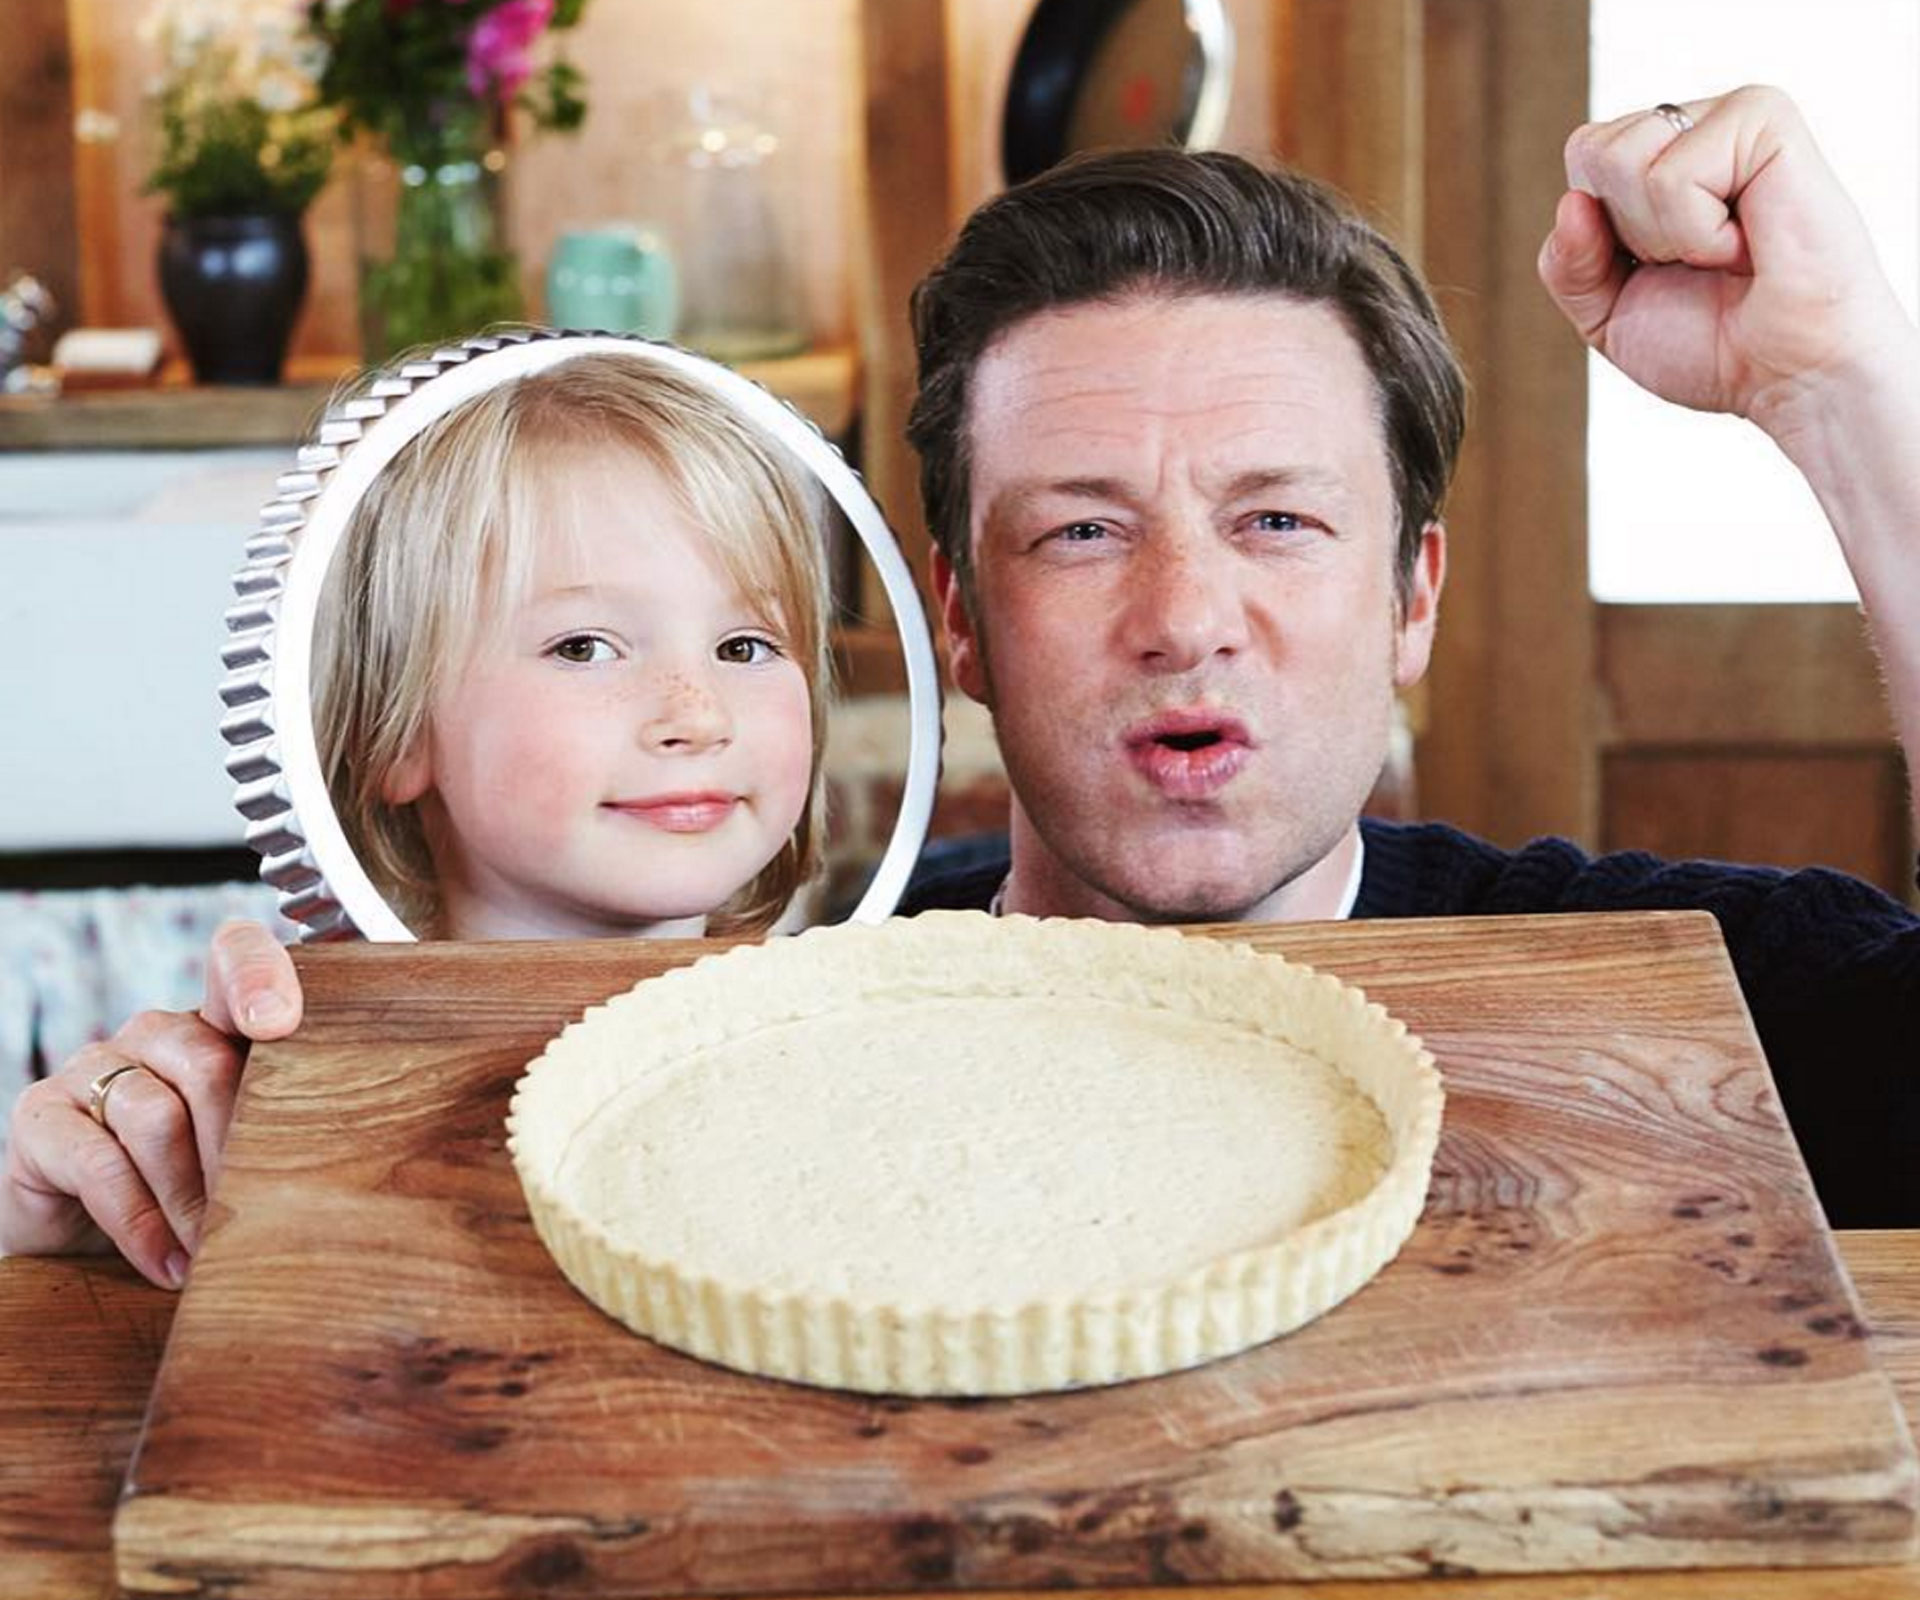 The child-friendly meal Jamie Oliver swears by